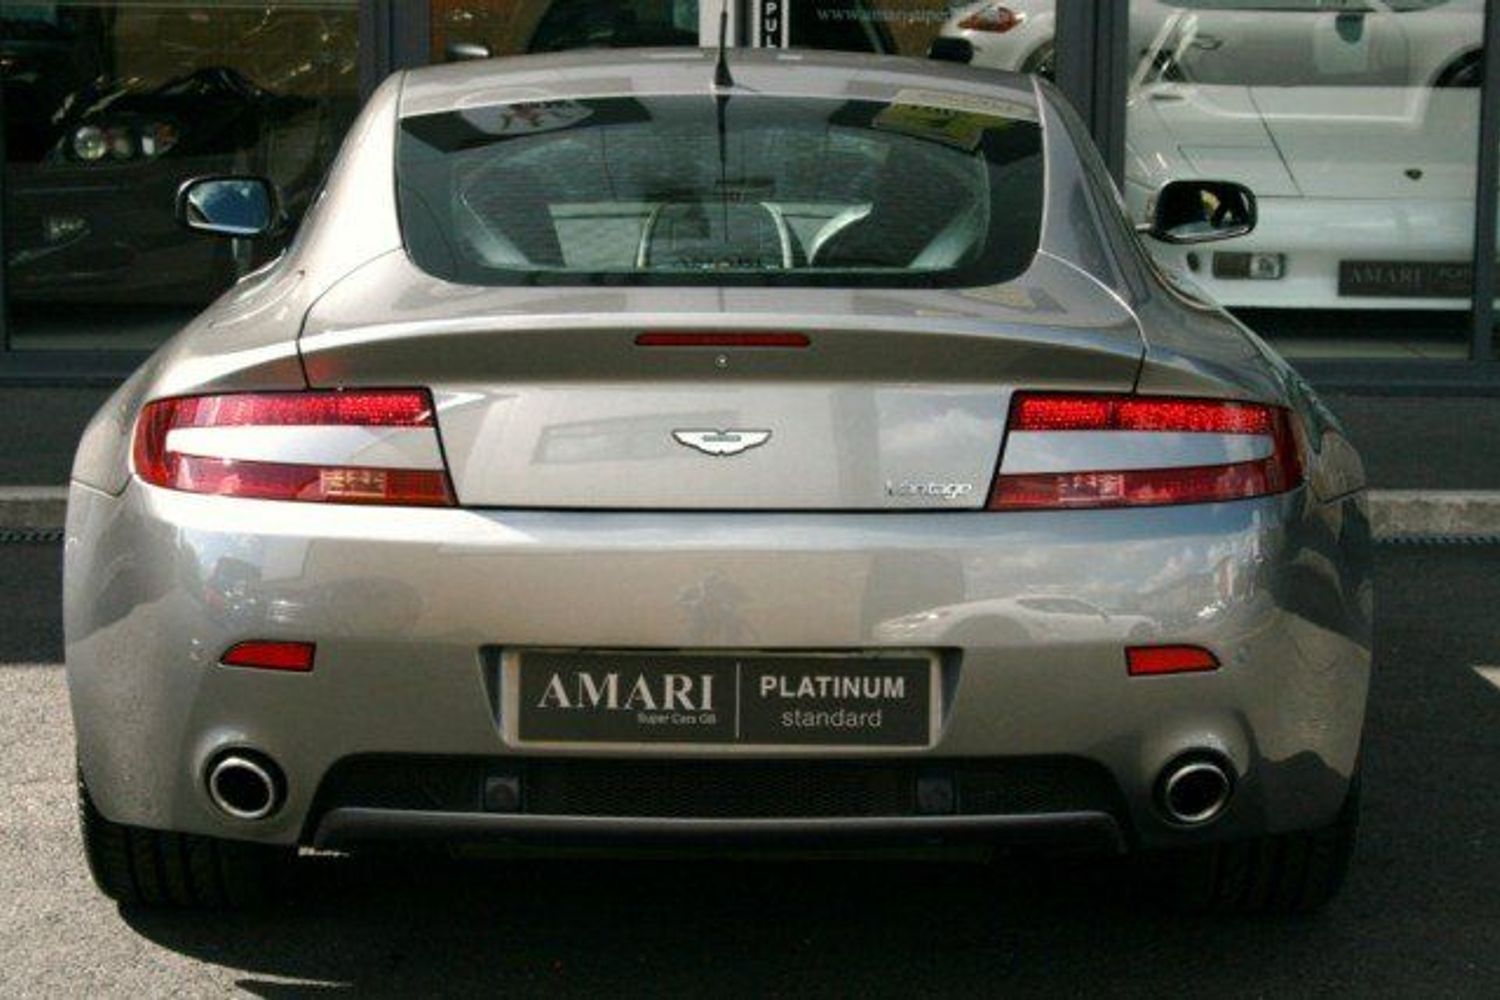 ASTON MARTIN Coupe V8 Vantage(WE HAVE TWO OF THESE FANTASTIC ASTONS IN STOCK NOW)